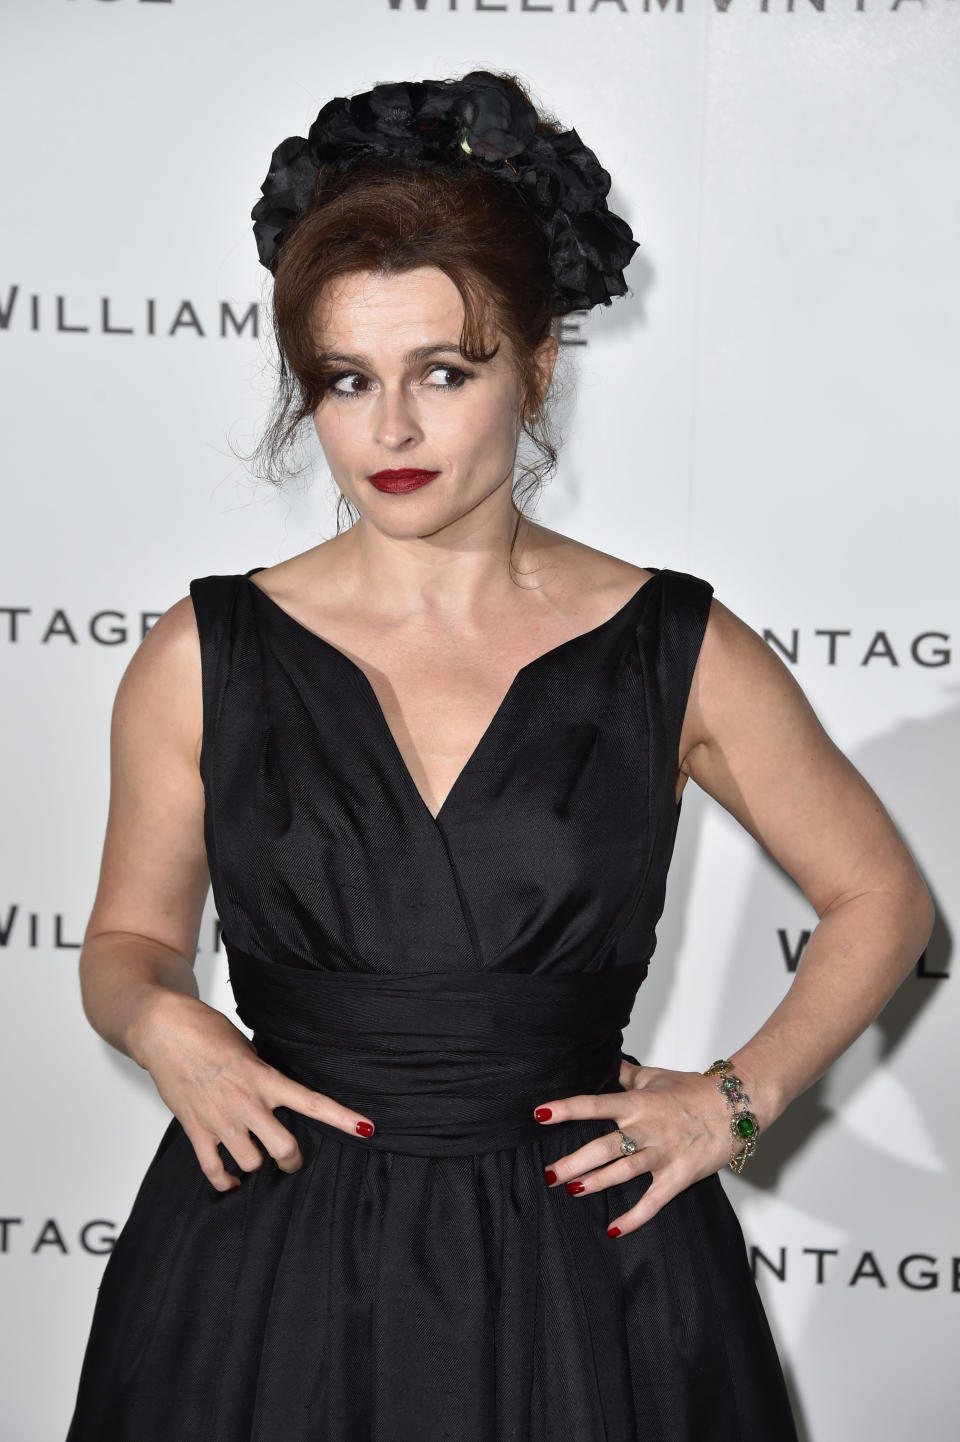 Helena Bonham Carter attending the WilliamVintage Summer Party, at Clarige's in London.